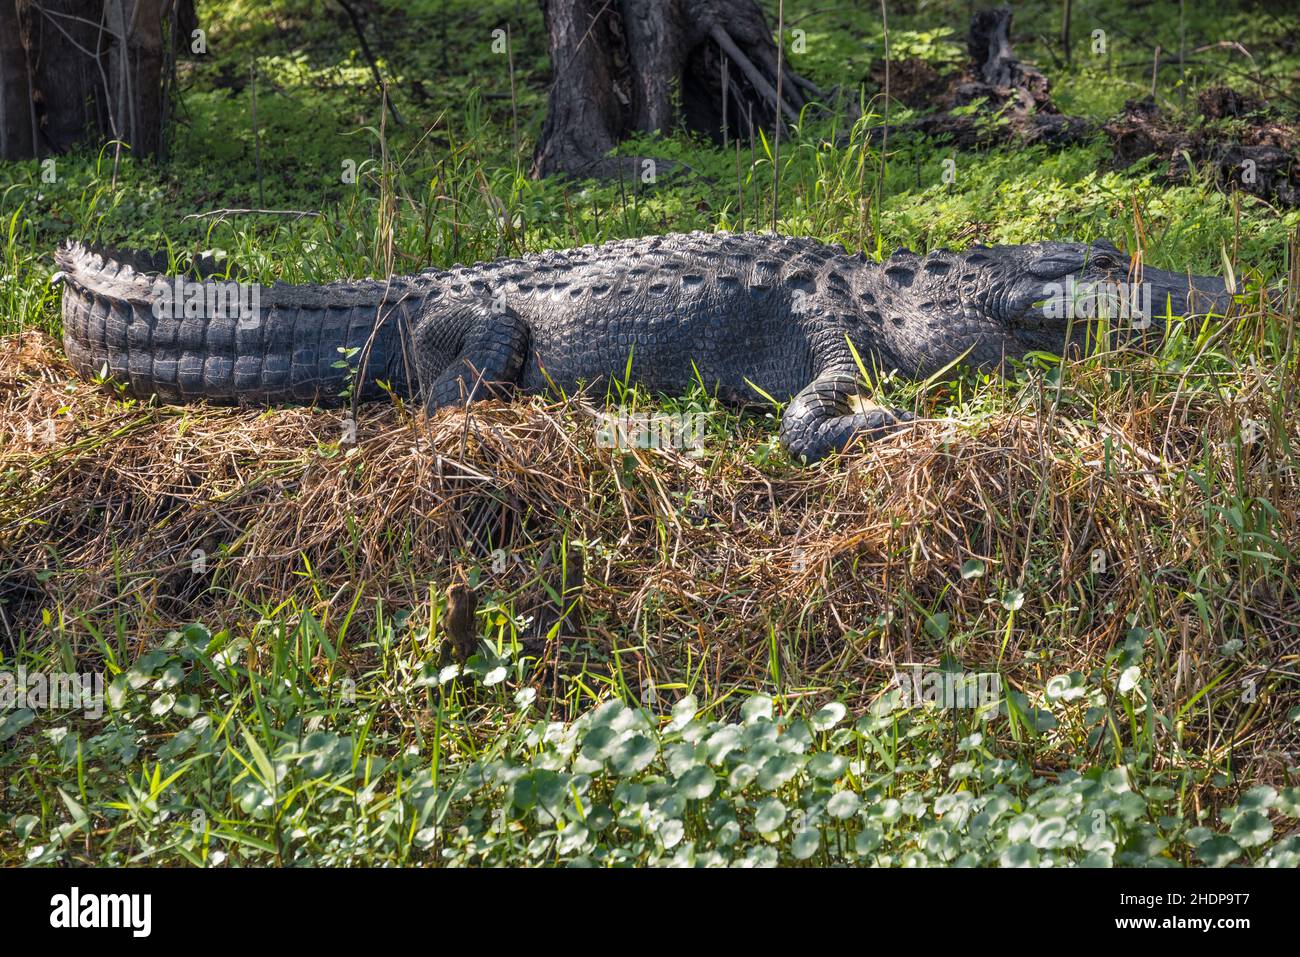 American alligator (Alligator mississippiensis) along the shoreline of the St. Johns River near Blue Spring State Park in Orange City, Florida. (USA) Stock Photo